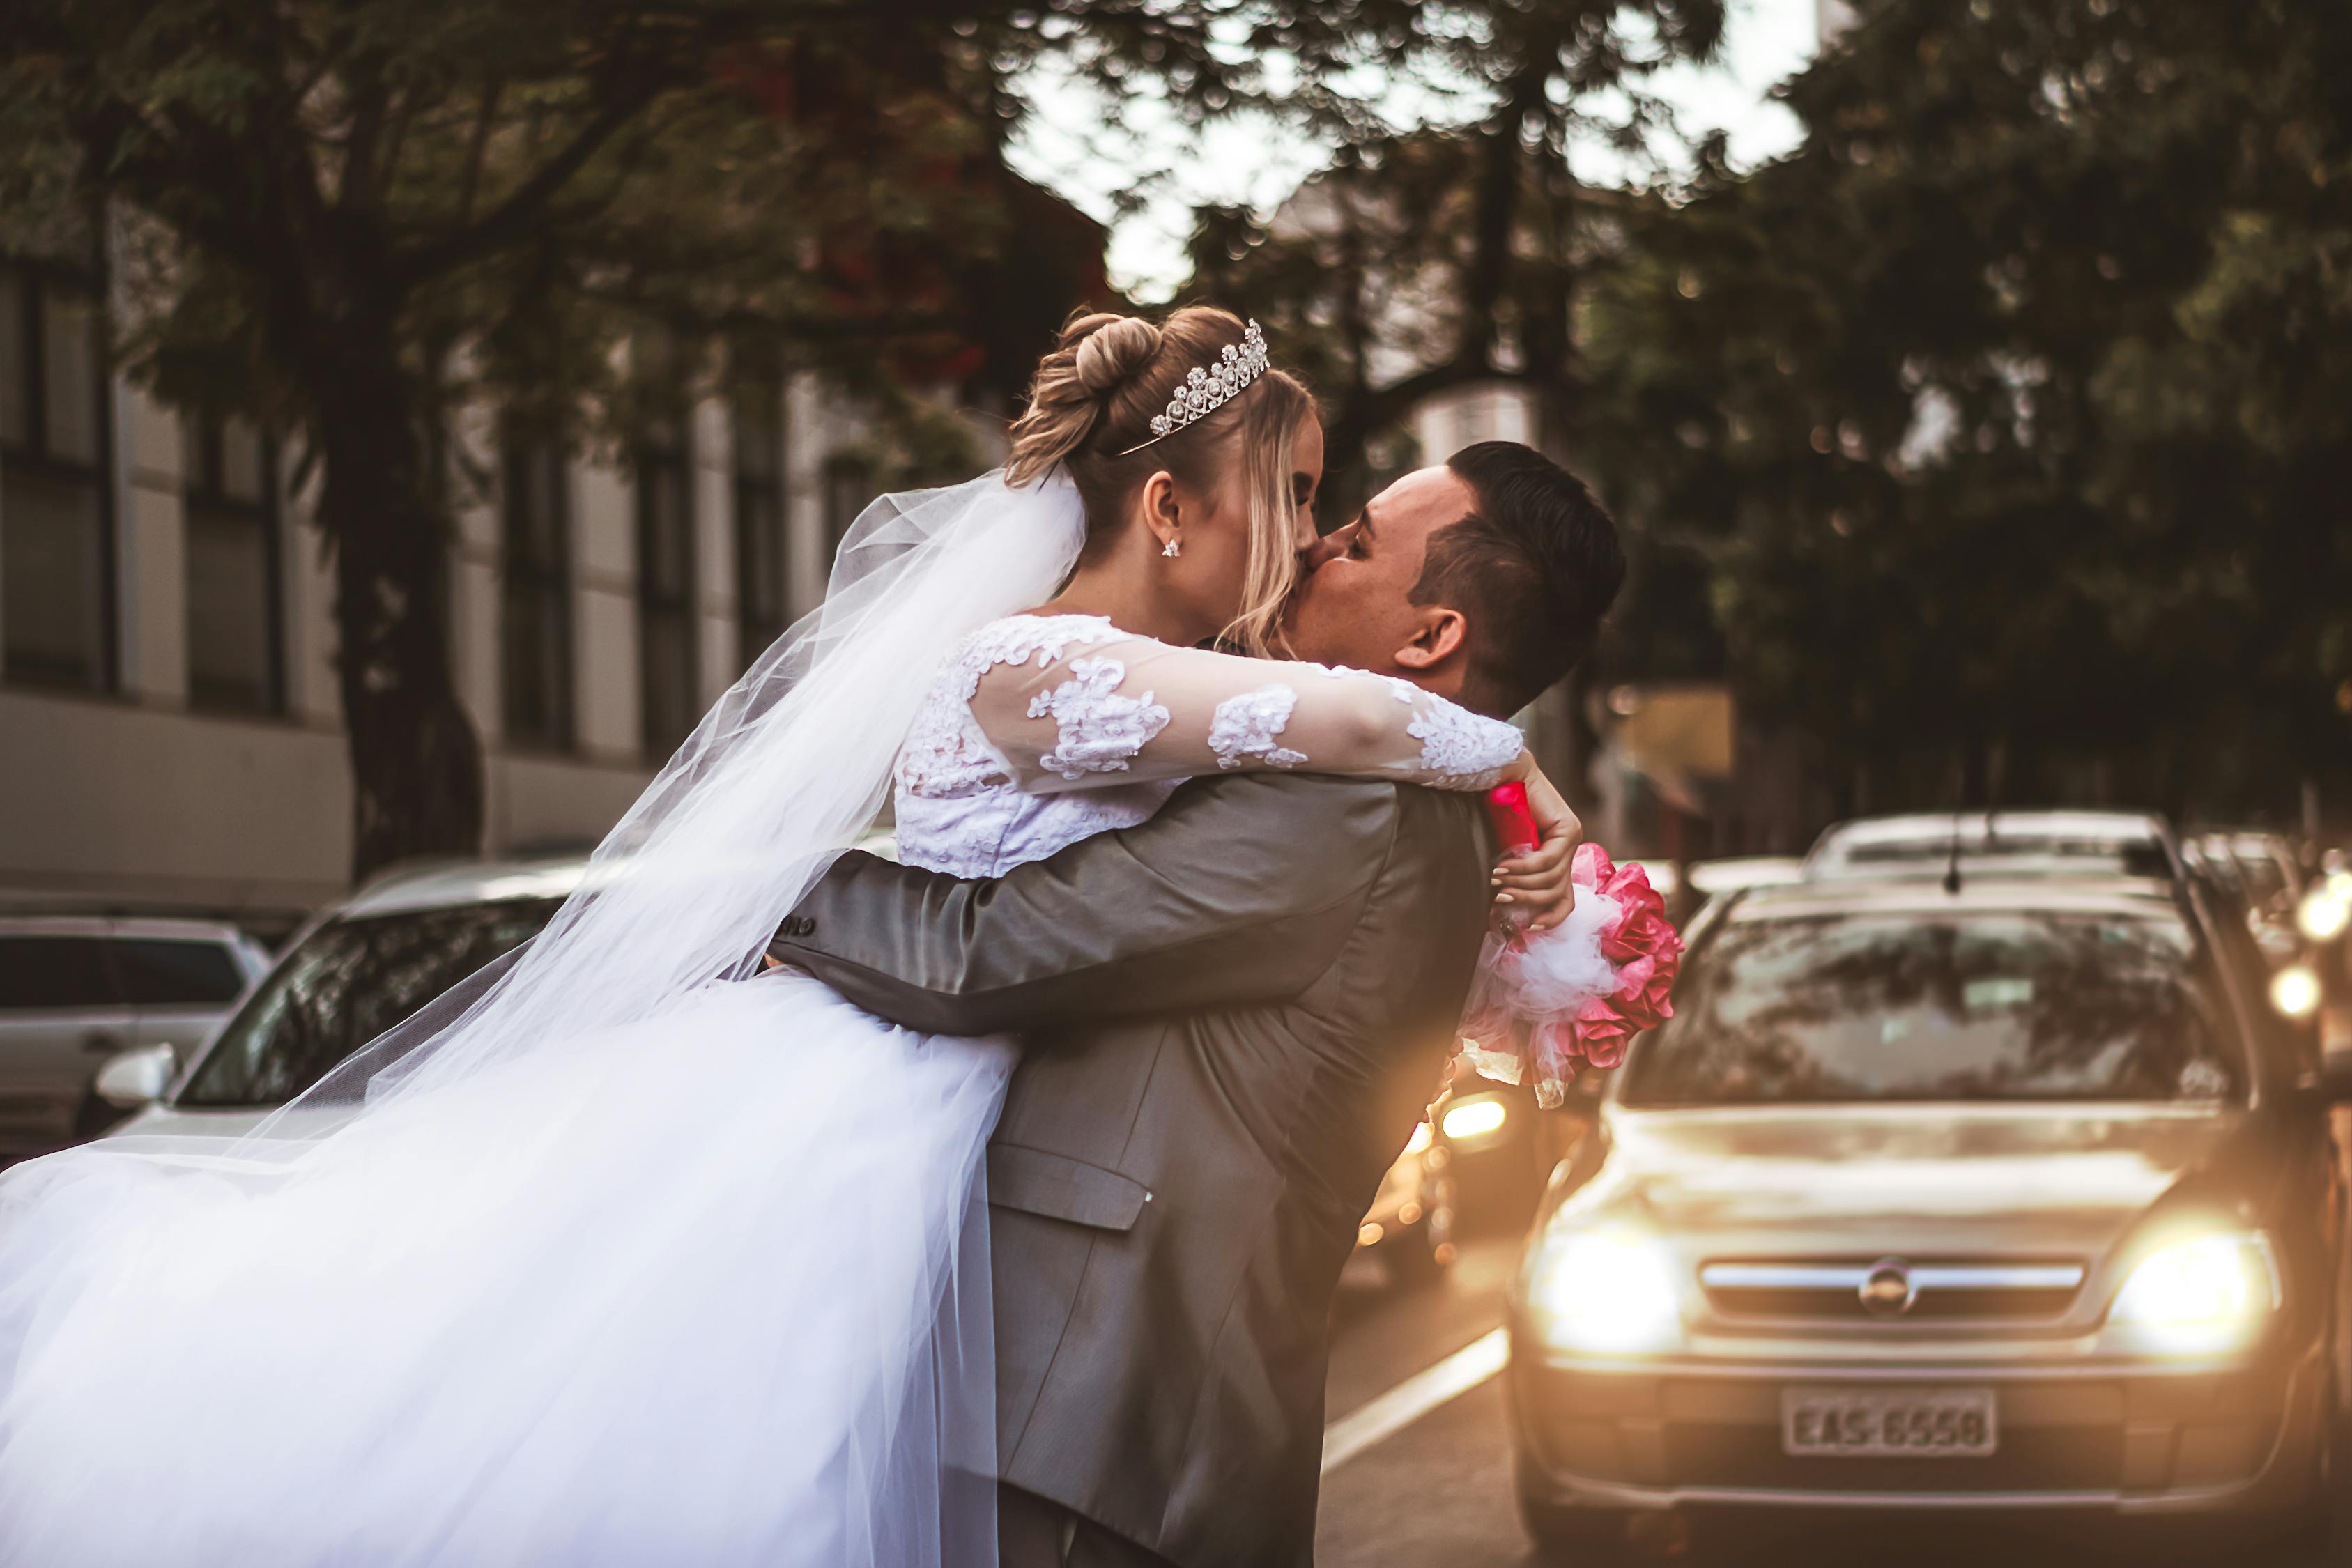 Groom And Bridge Kissing Each Other · Free Stock Photo